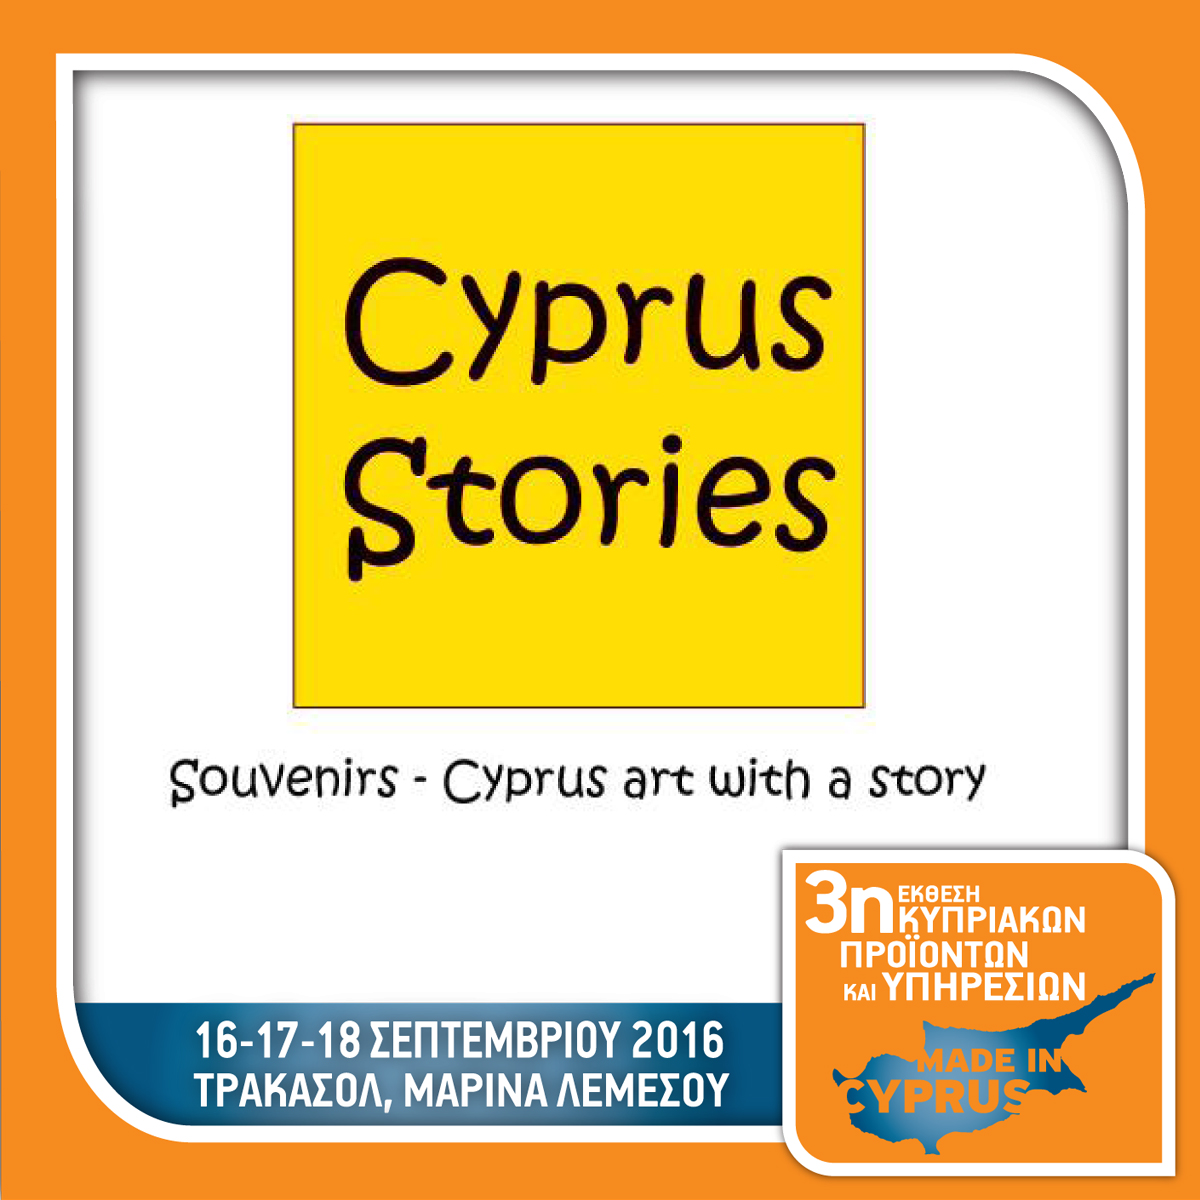 Cyprus Stories - Booth No 6